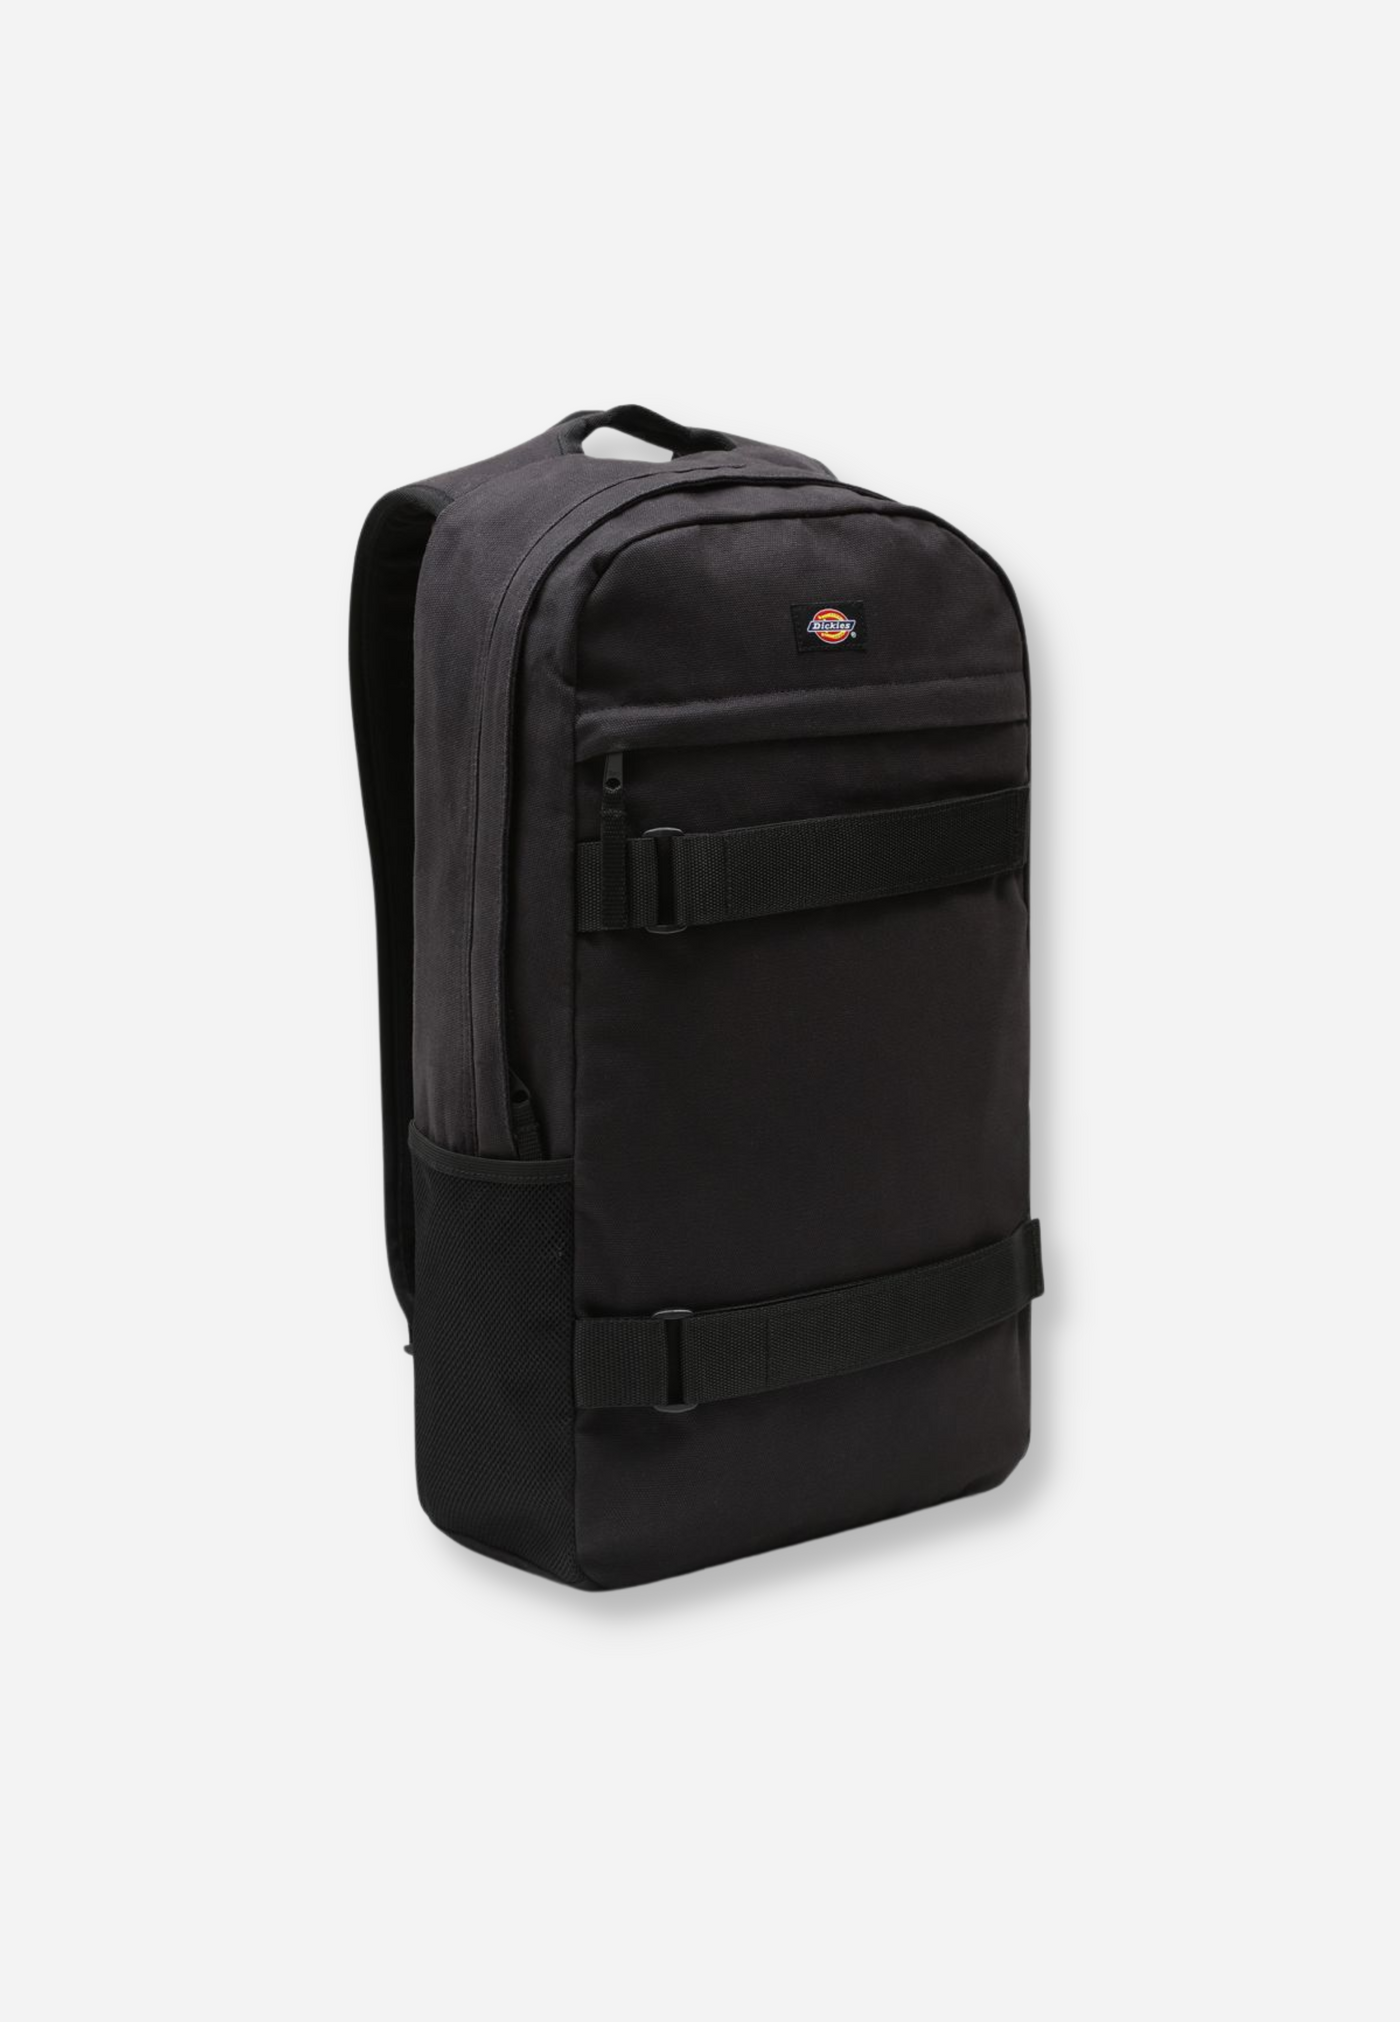 DUCK CANVAS BACKPACK - BLACK